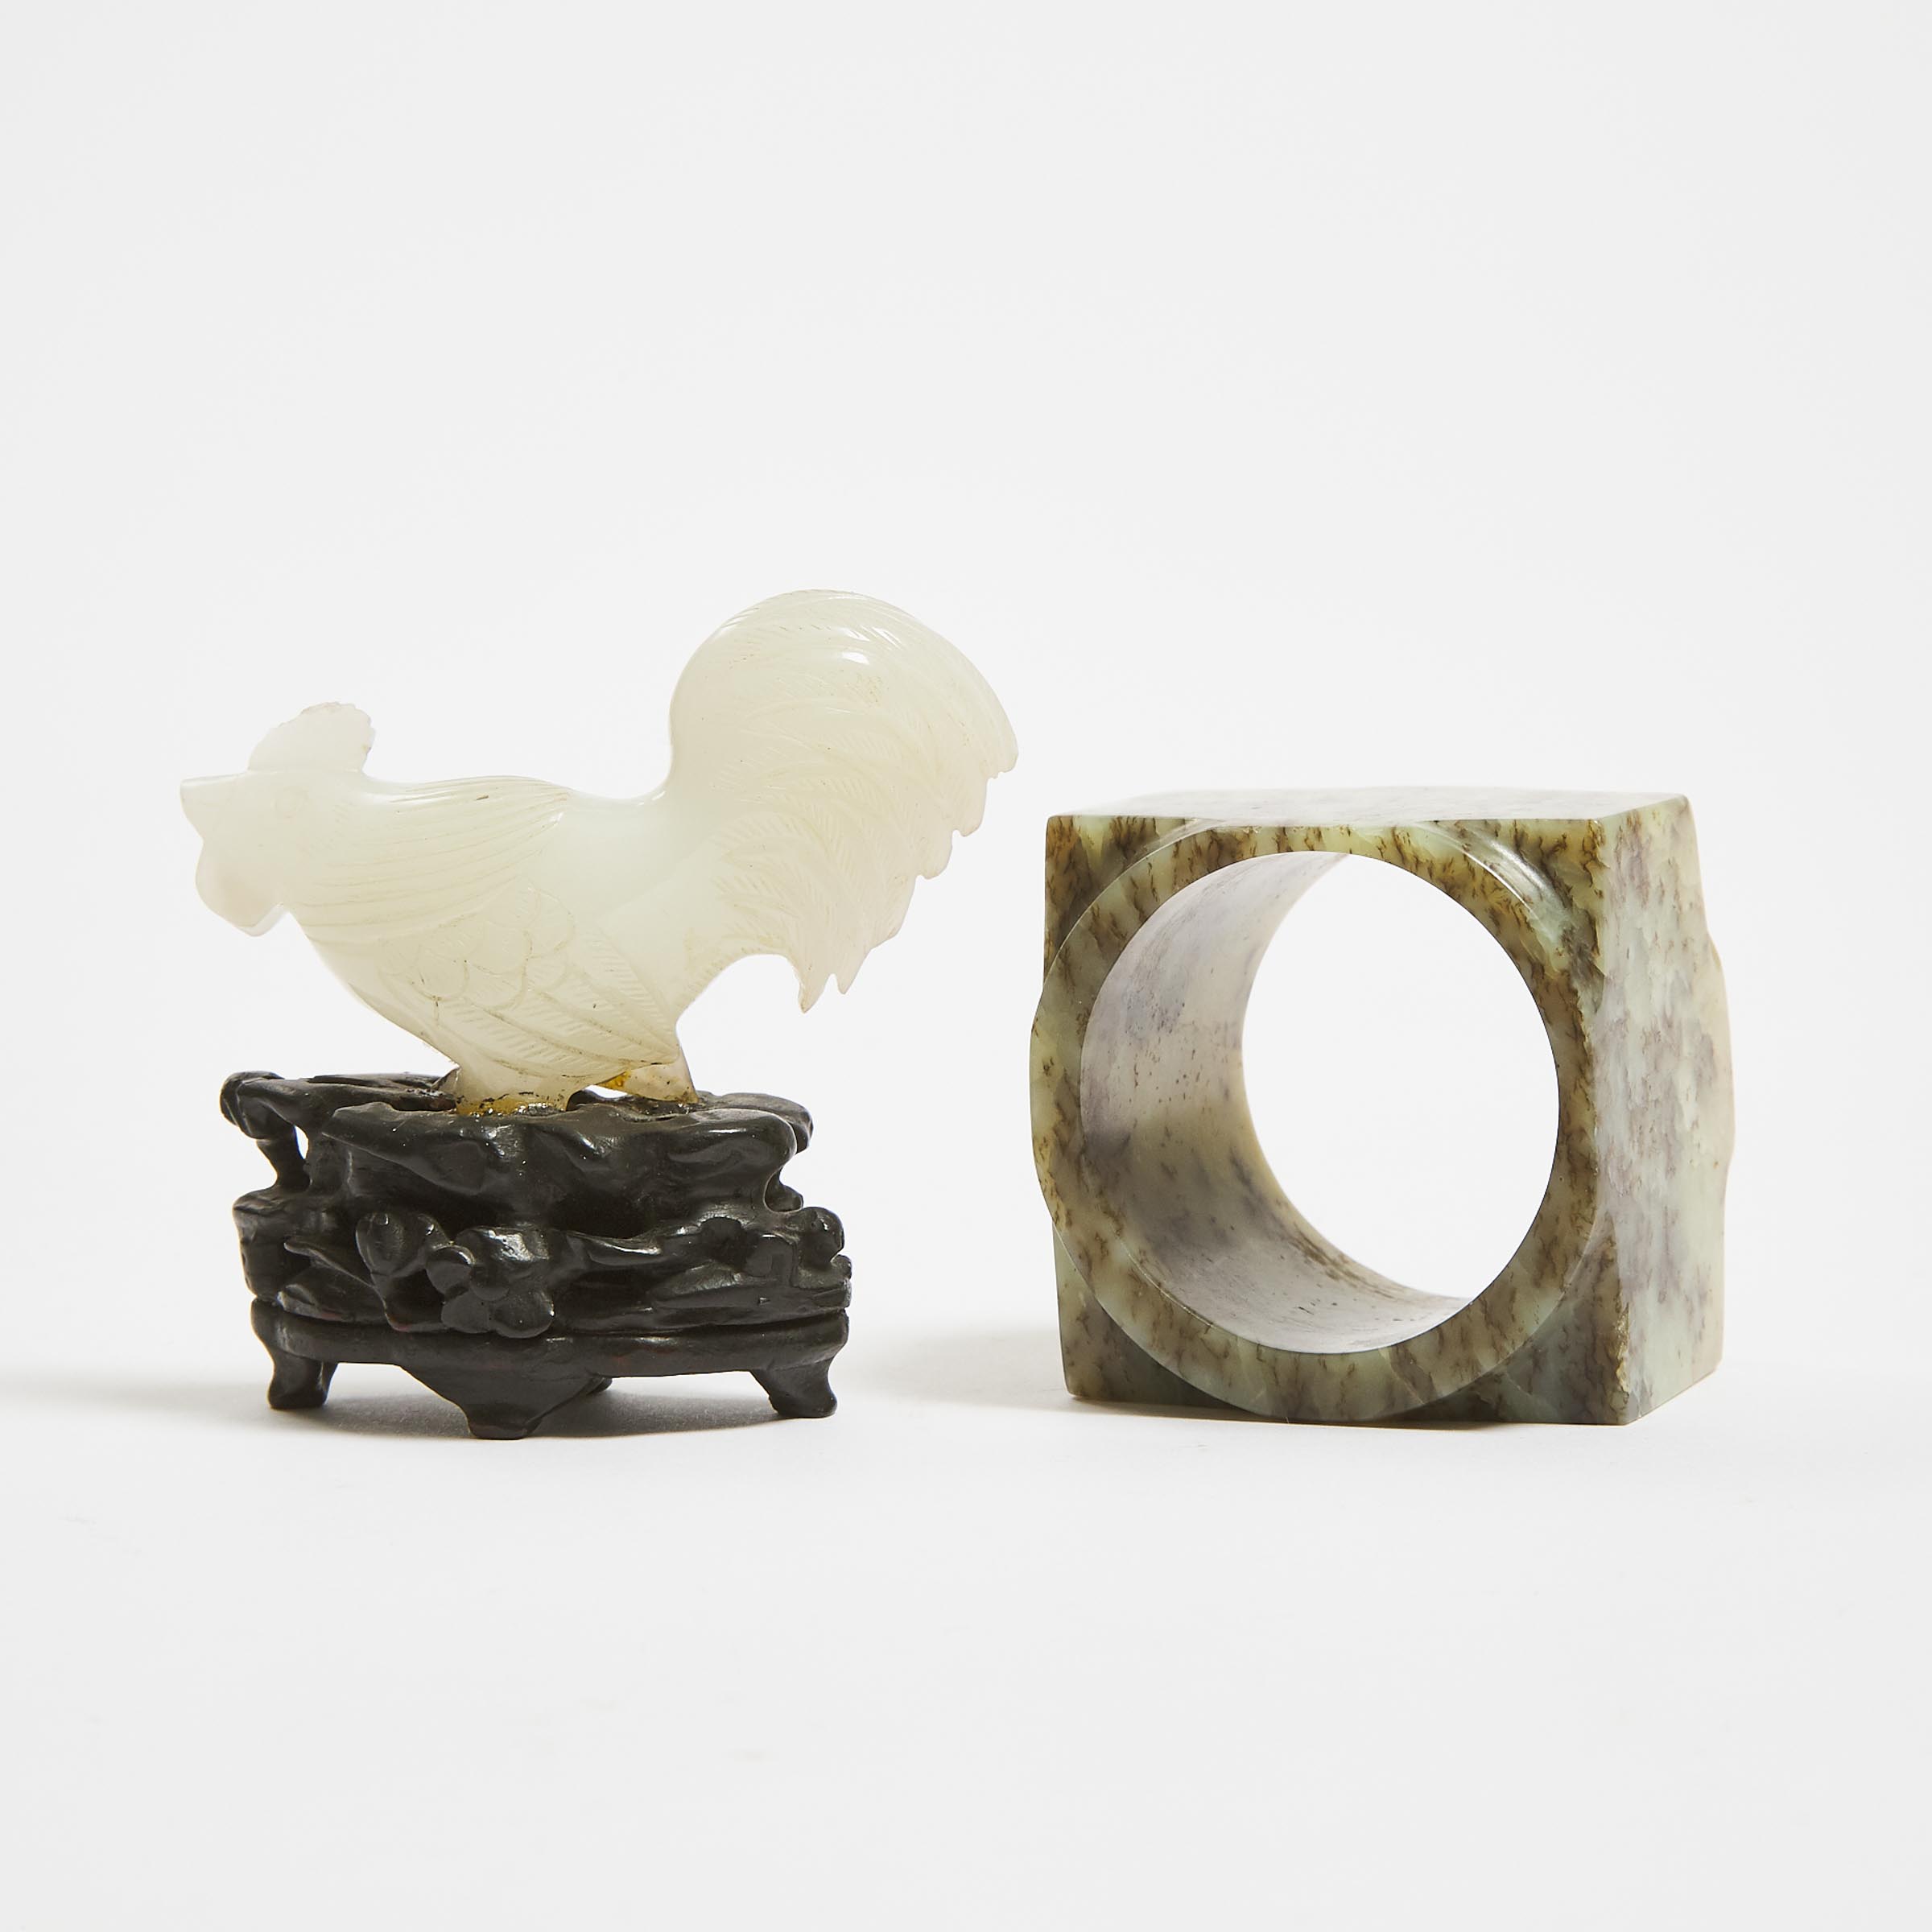 A White Jade Carving of a Rooster, Together With a Mottled Jade 'Cong', 18th Century and Later